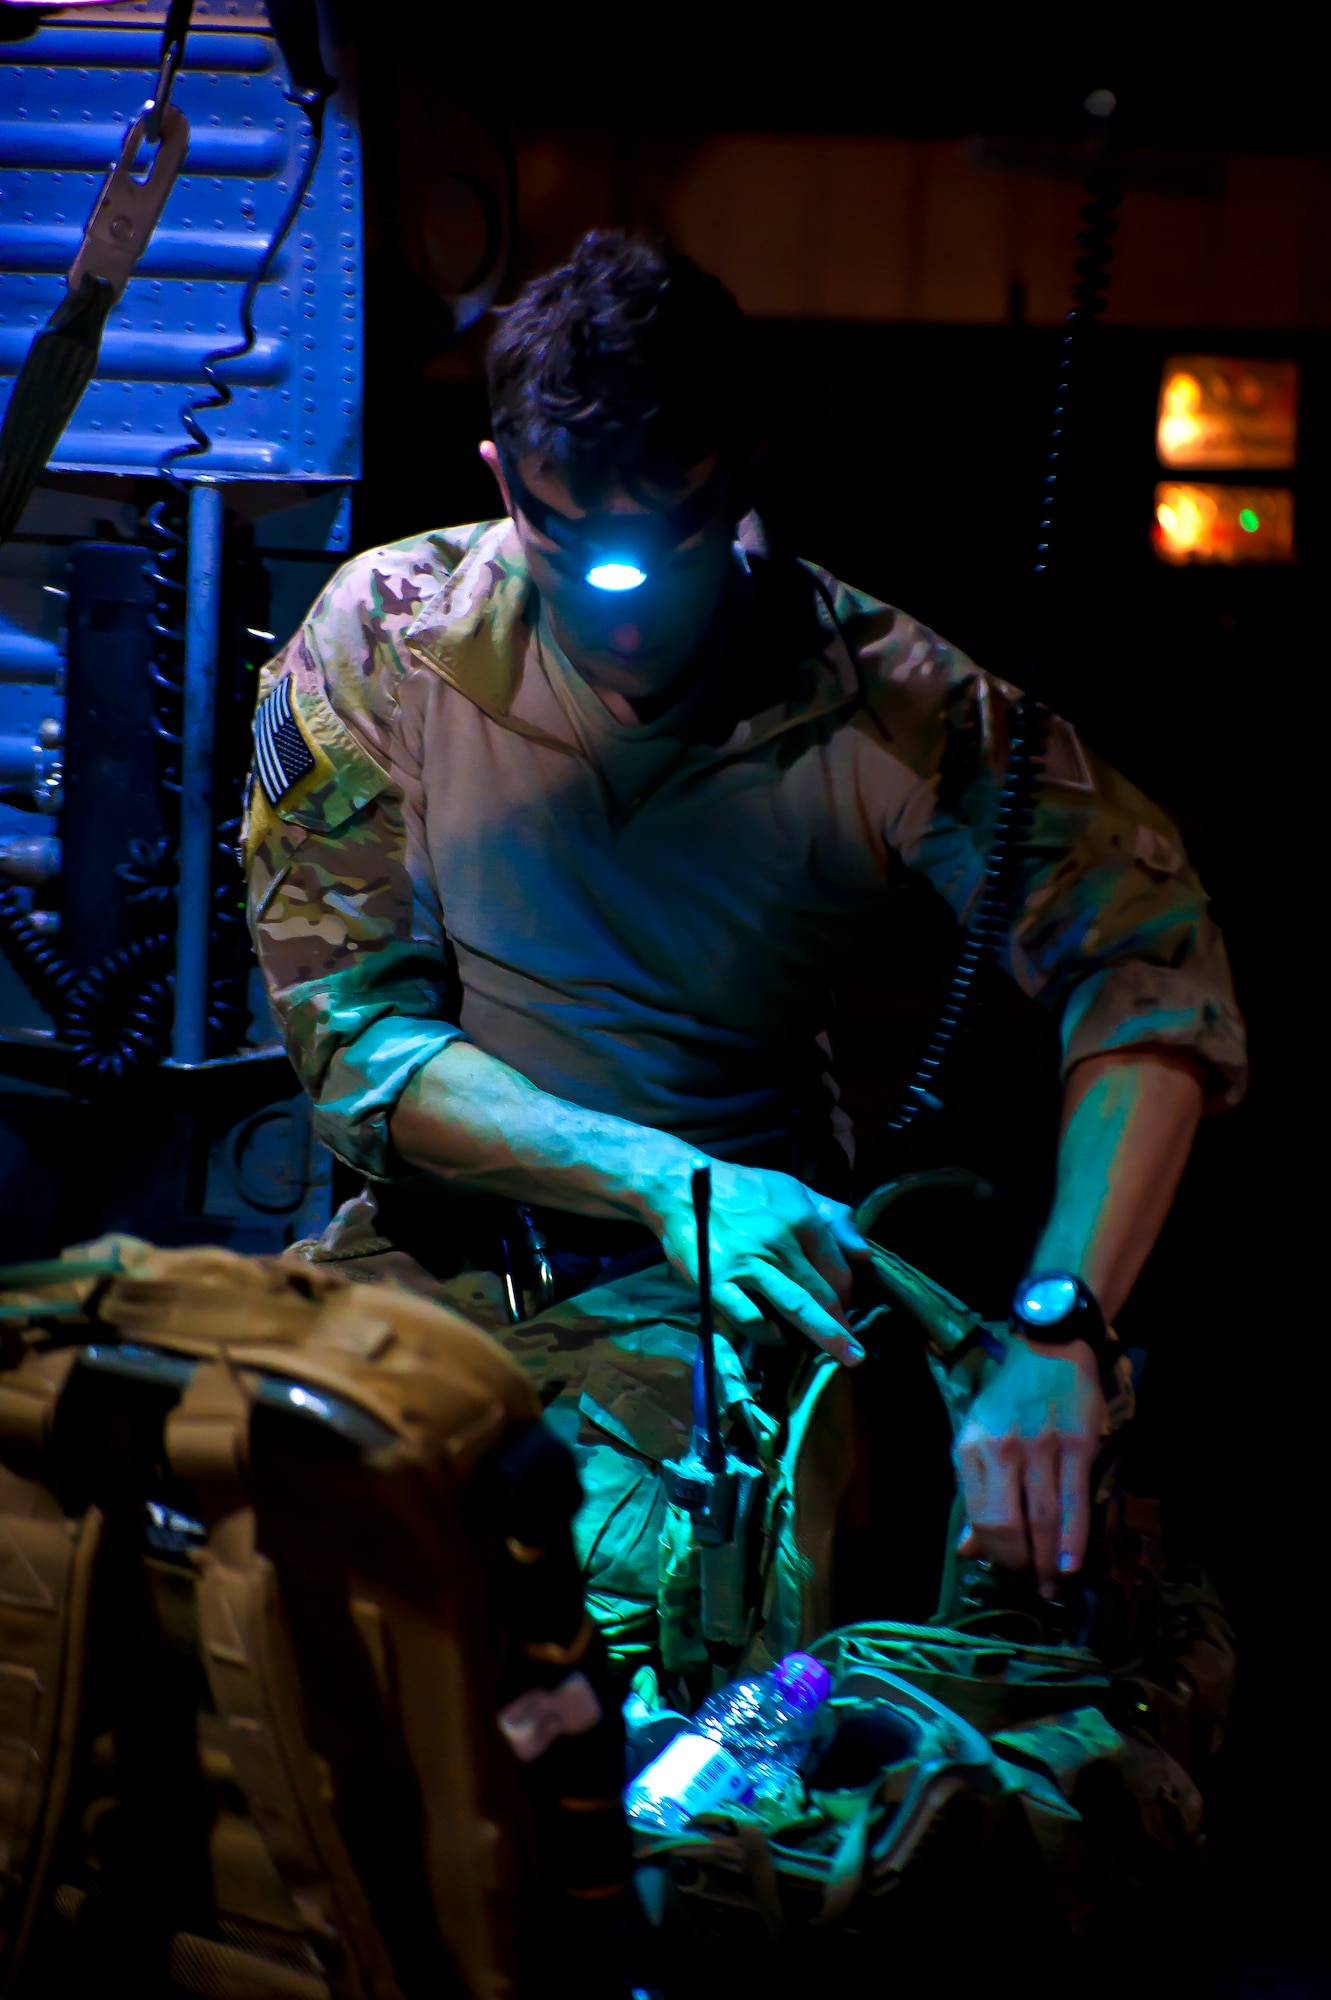 A combat rescue officer assigned to the 26th Expeditionary Rescue Squadron conducts a preflight inspection on an HH-60G Pave Hawk May 25, 2013, at Camp Bastion, Afghanistan. The HH-60 is designed for conducting personnel recovery operations into hostile environments to recover isolated personnel. The Pave Hawks are also used for medical evacuation, humanitarian assistance, disaster response and rescue command and control. (U.S. Air Force photo/Senior Airman Scott Saldukas)